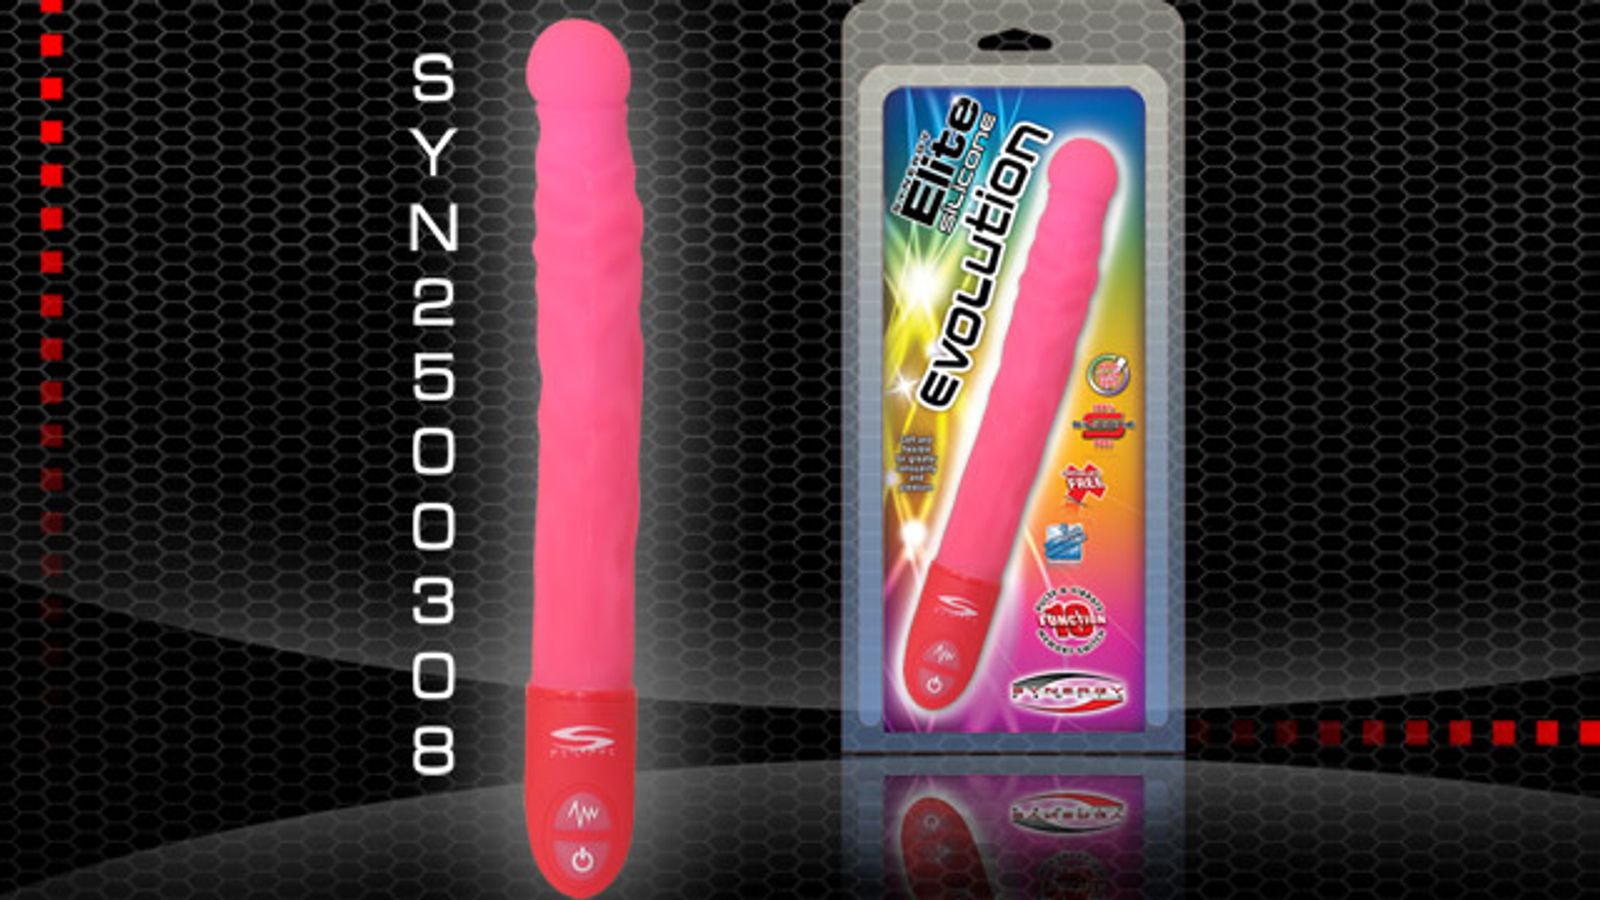 Synergy Erotic Debuts Latest ‘Evolution’ in Elite Silicone Sex Toys